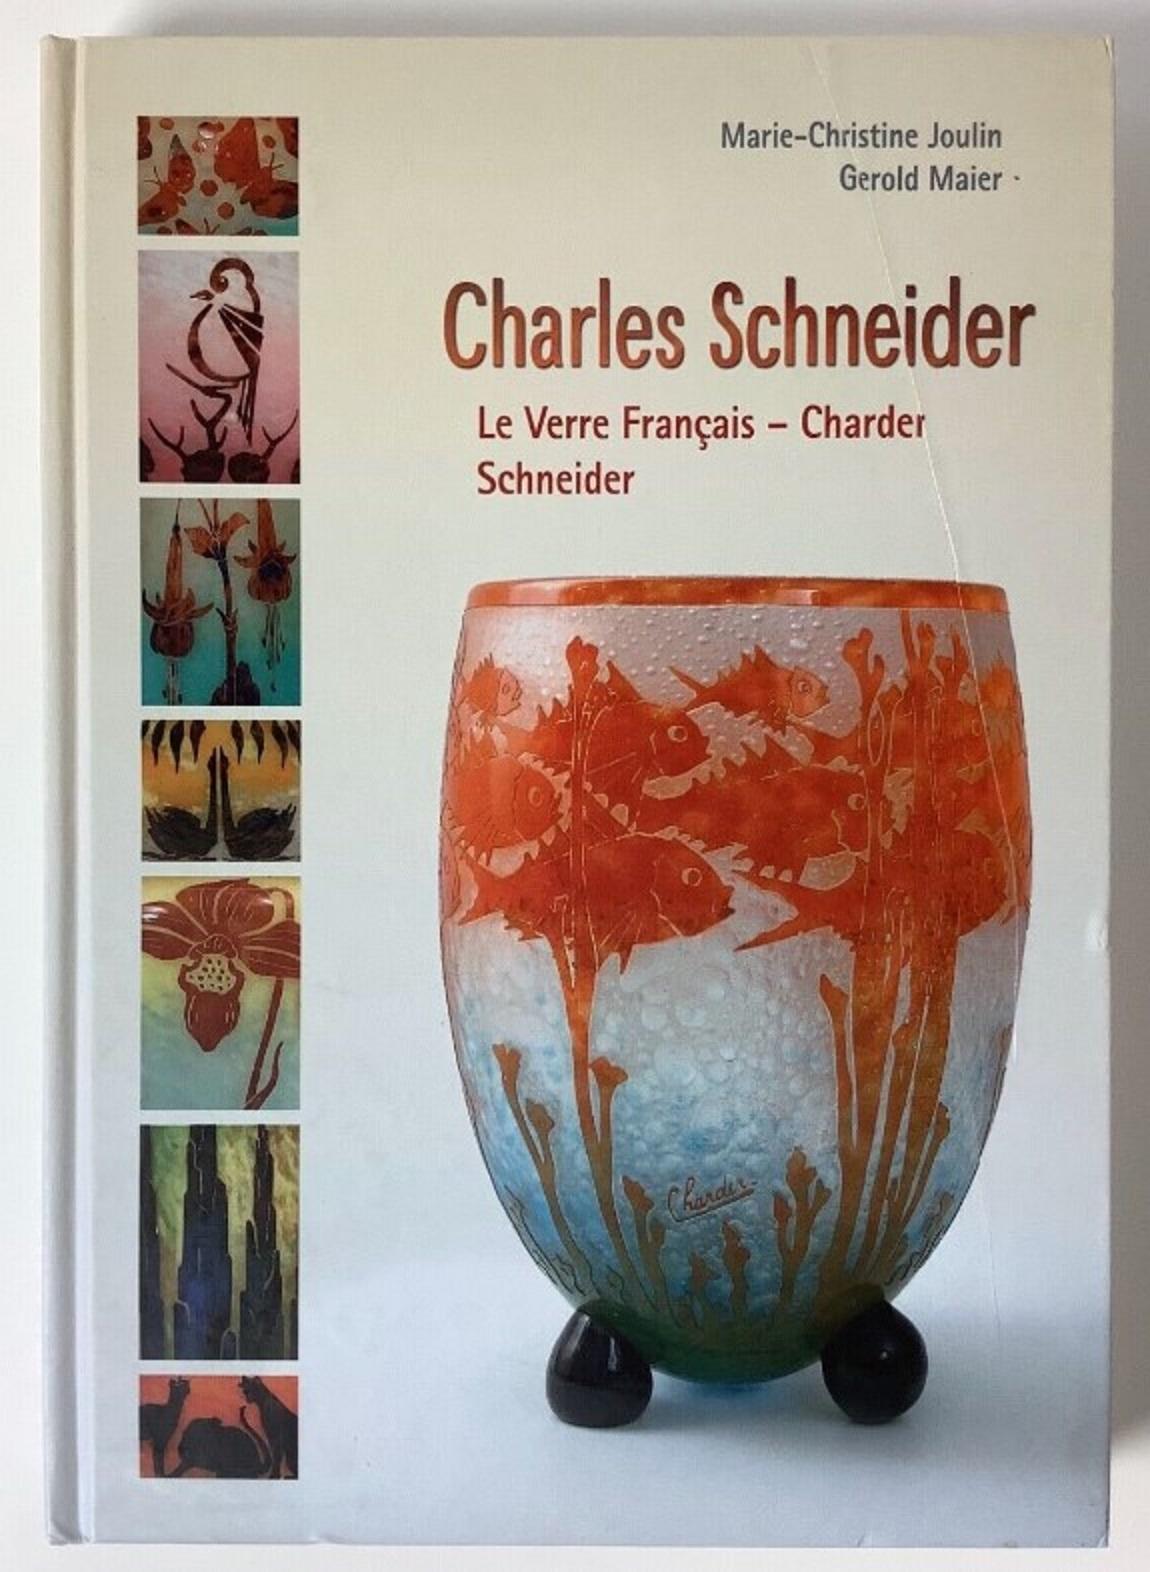 Vase Sign: Le Verre Francais France ( Decoration Halbrans )
acid worked
Le Verre cameo glass was a separate line of art glass designed by Charles Schneider. Its production was made at the same time as the Schneider designed glasses 1918 –1933. But